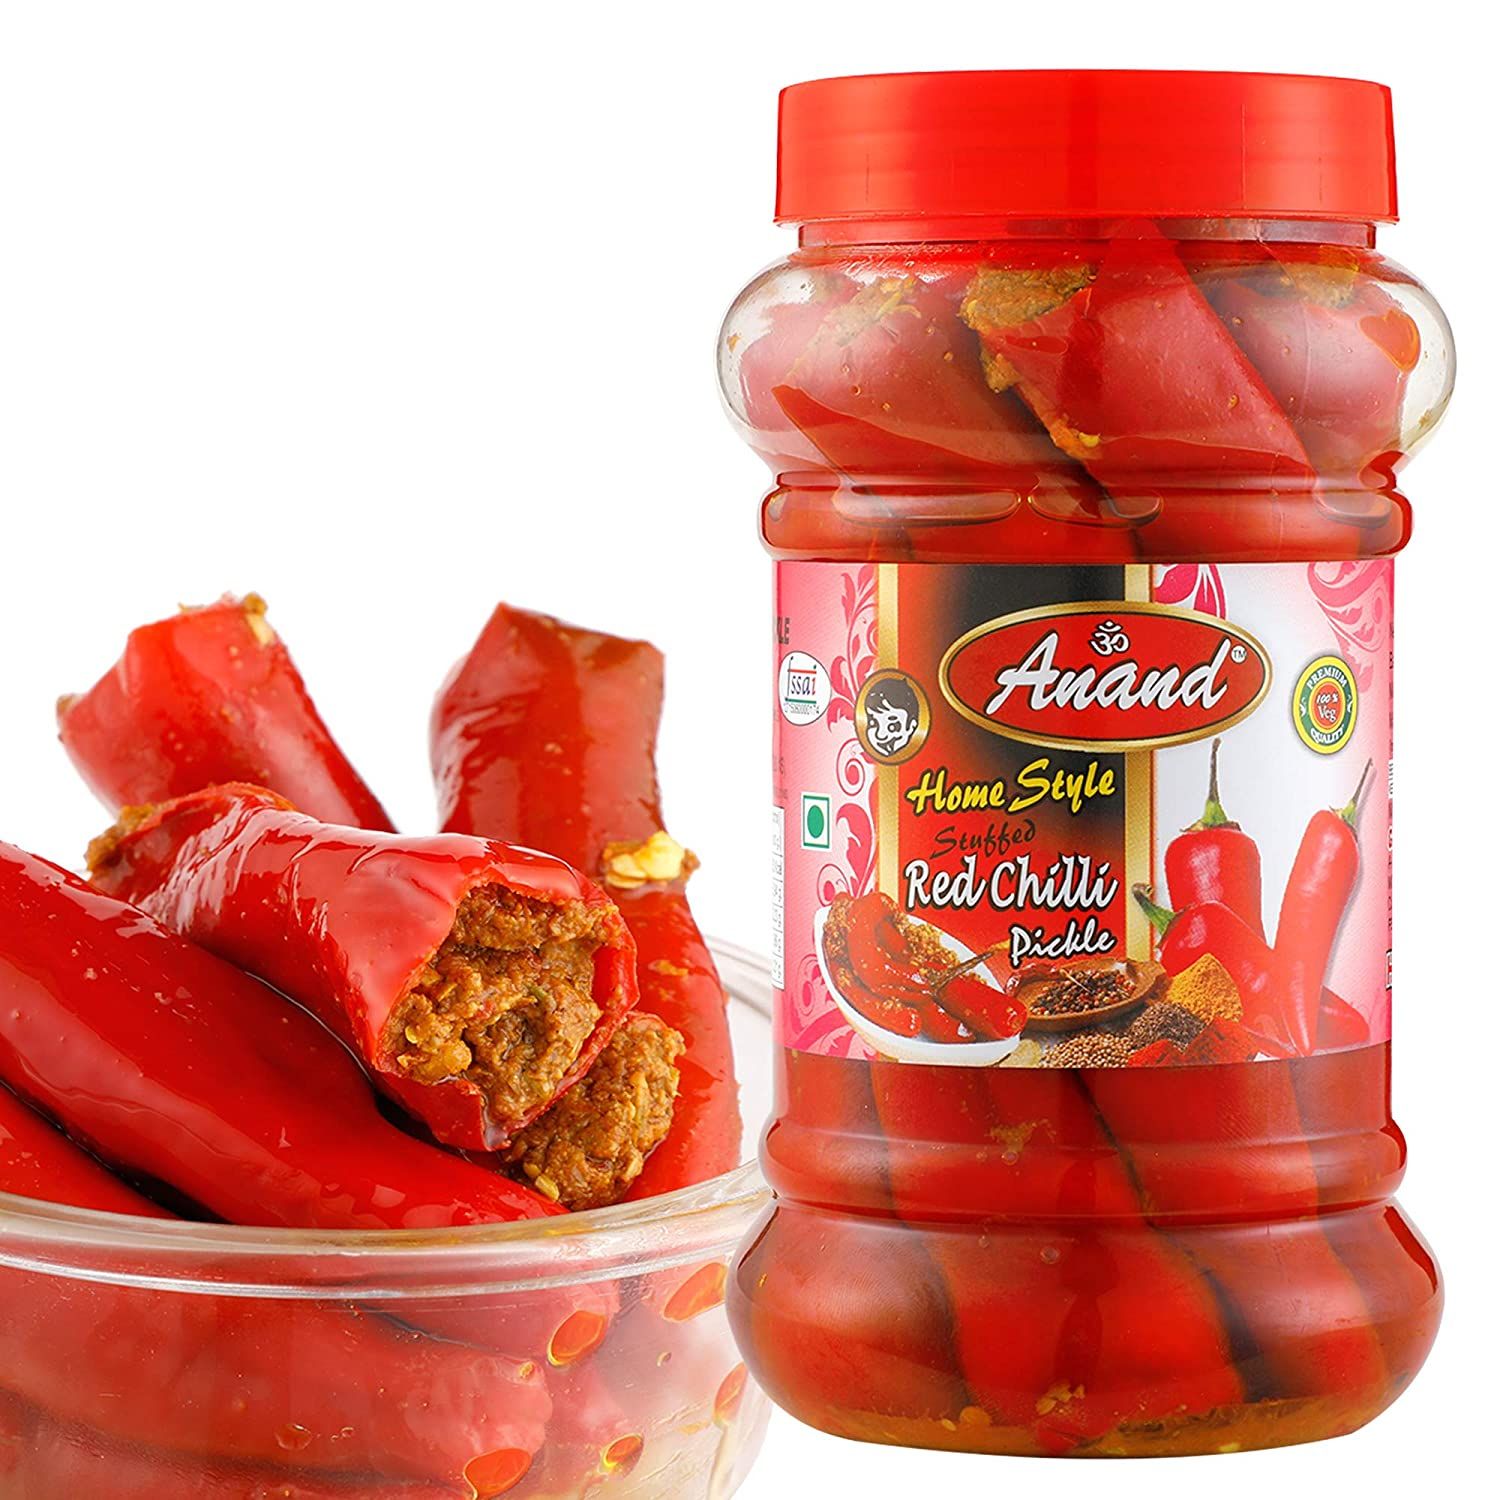 ANAND Stuffed Red ChilliPickle Image